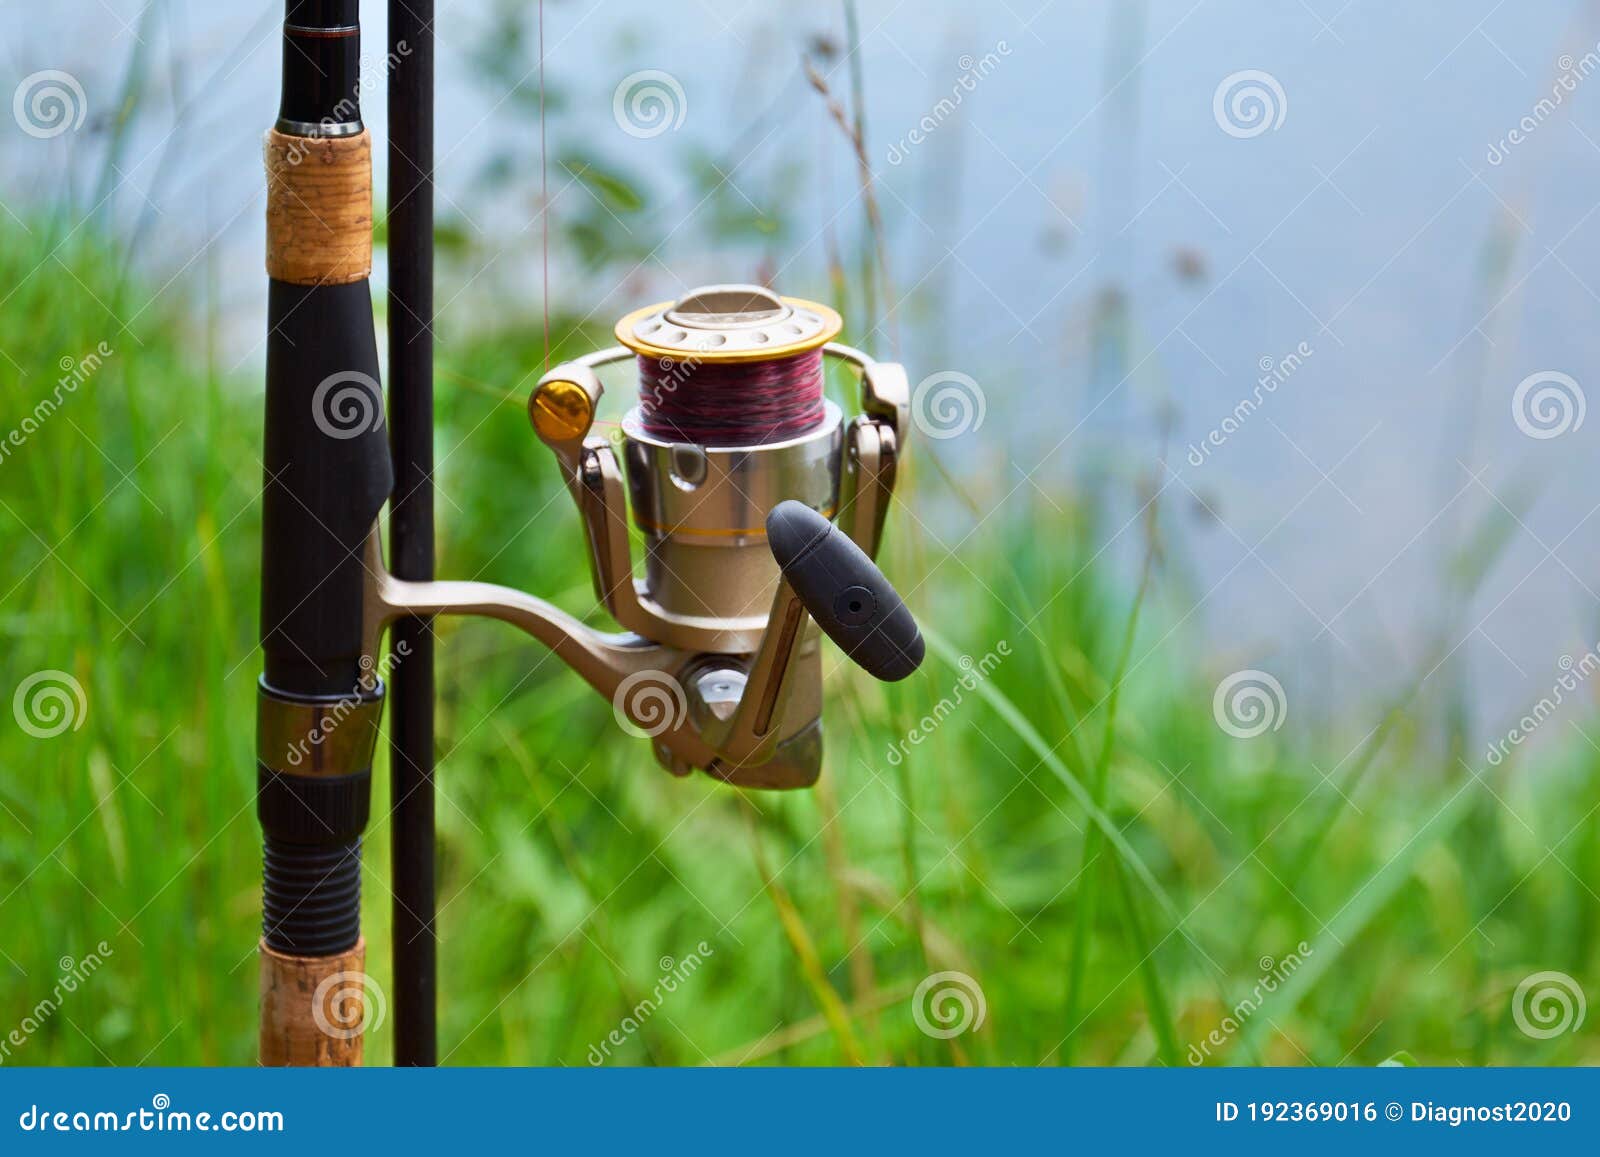 Feeder Fishing Rod with Coil on the Stand Against the Background of the  River and Grass. Feeder Fishing in English Style Stock Photo - Image of  feeder, gear: 192369016